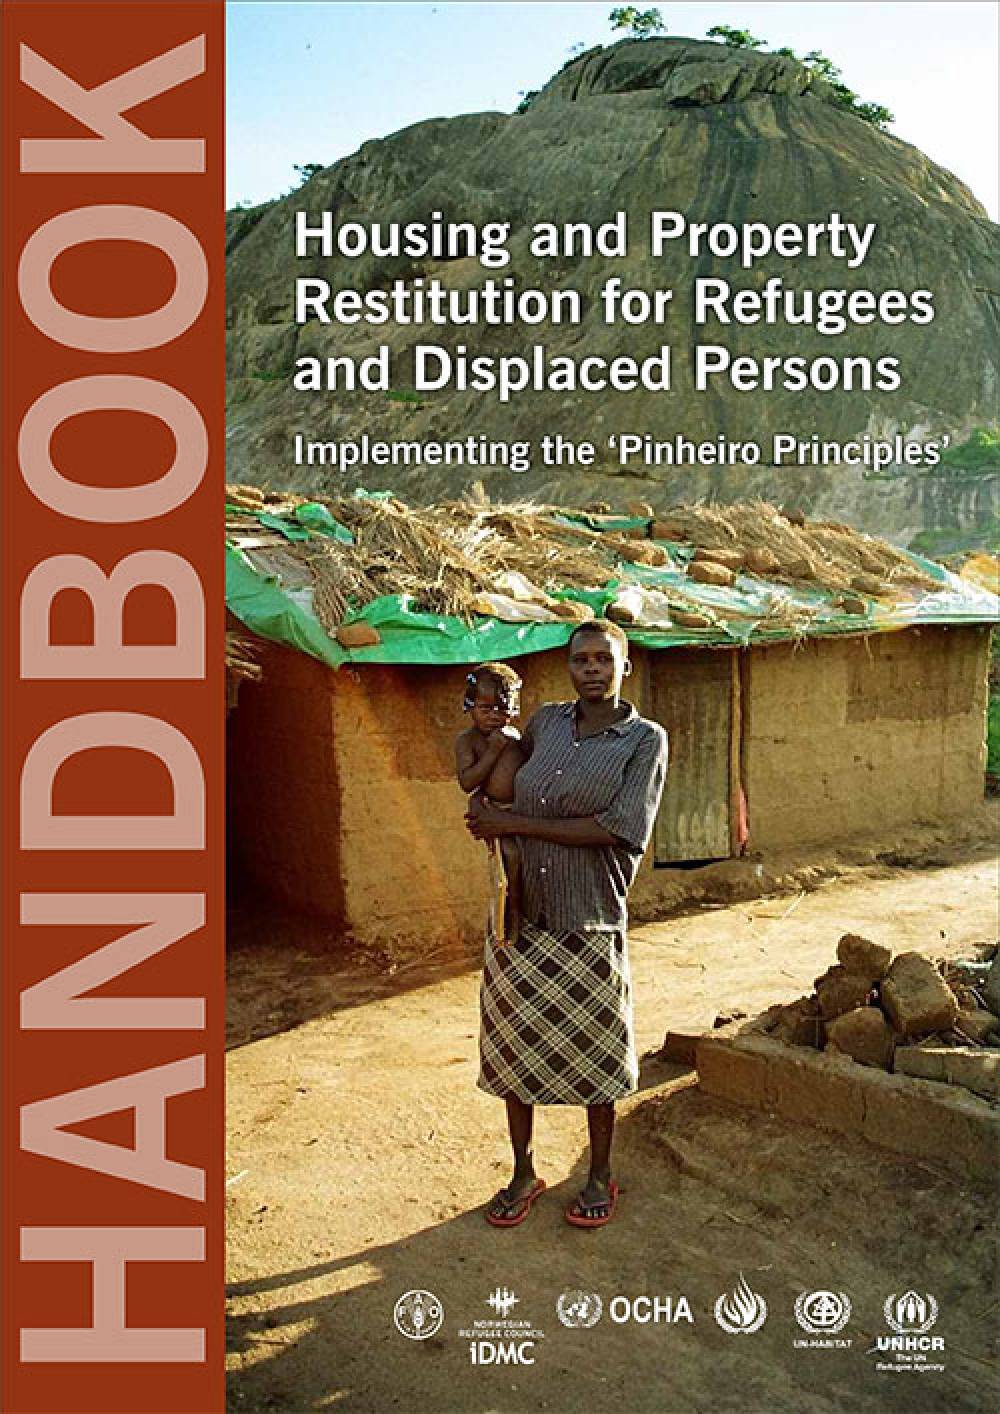 Housing and Property Restitution for Refugees and Displaced Persons